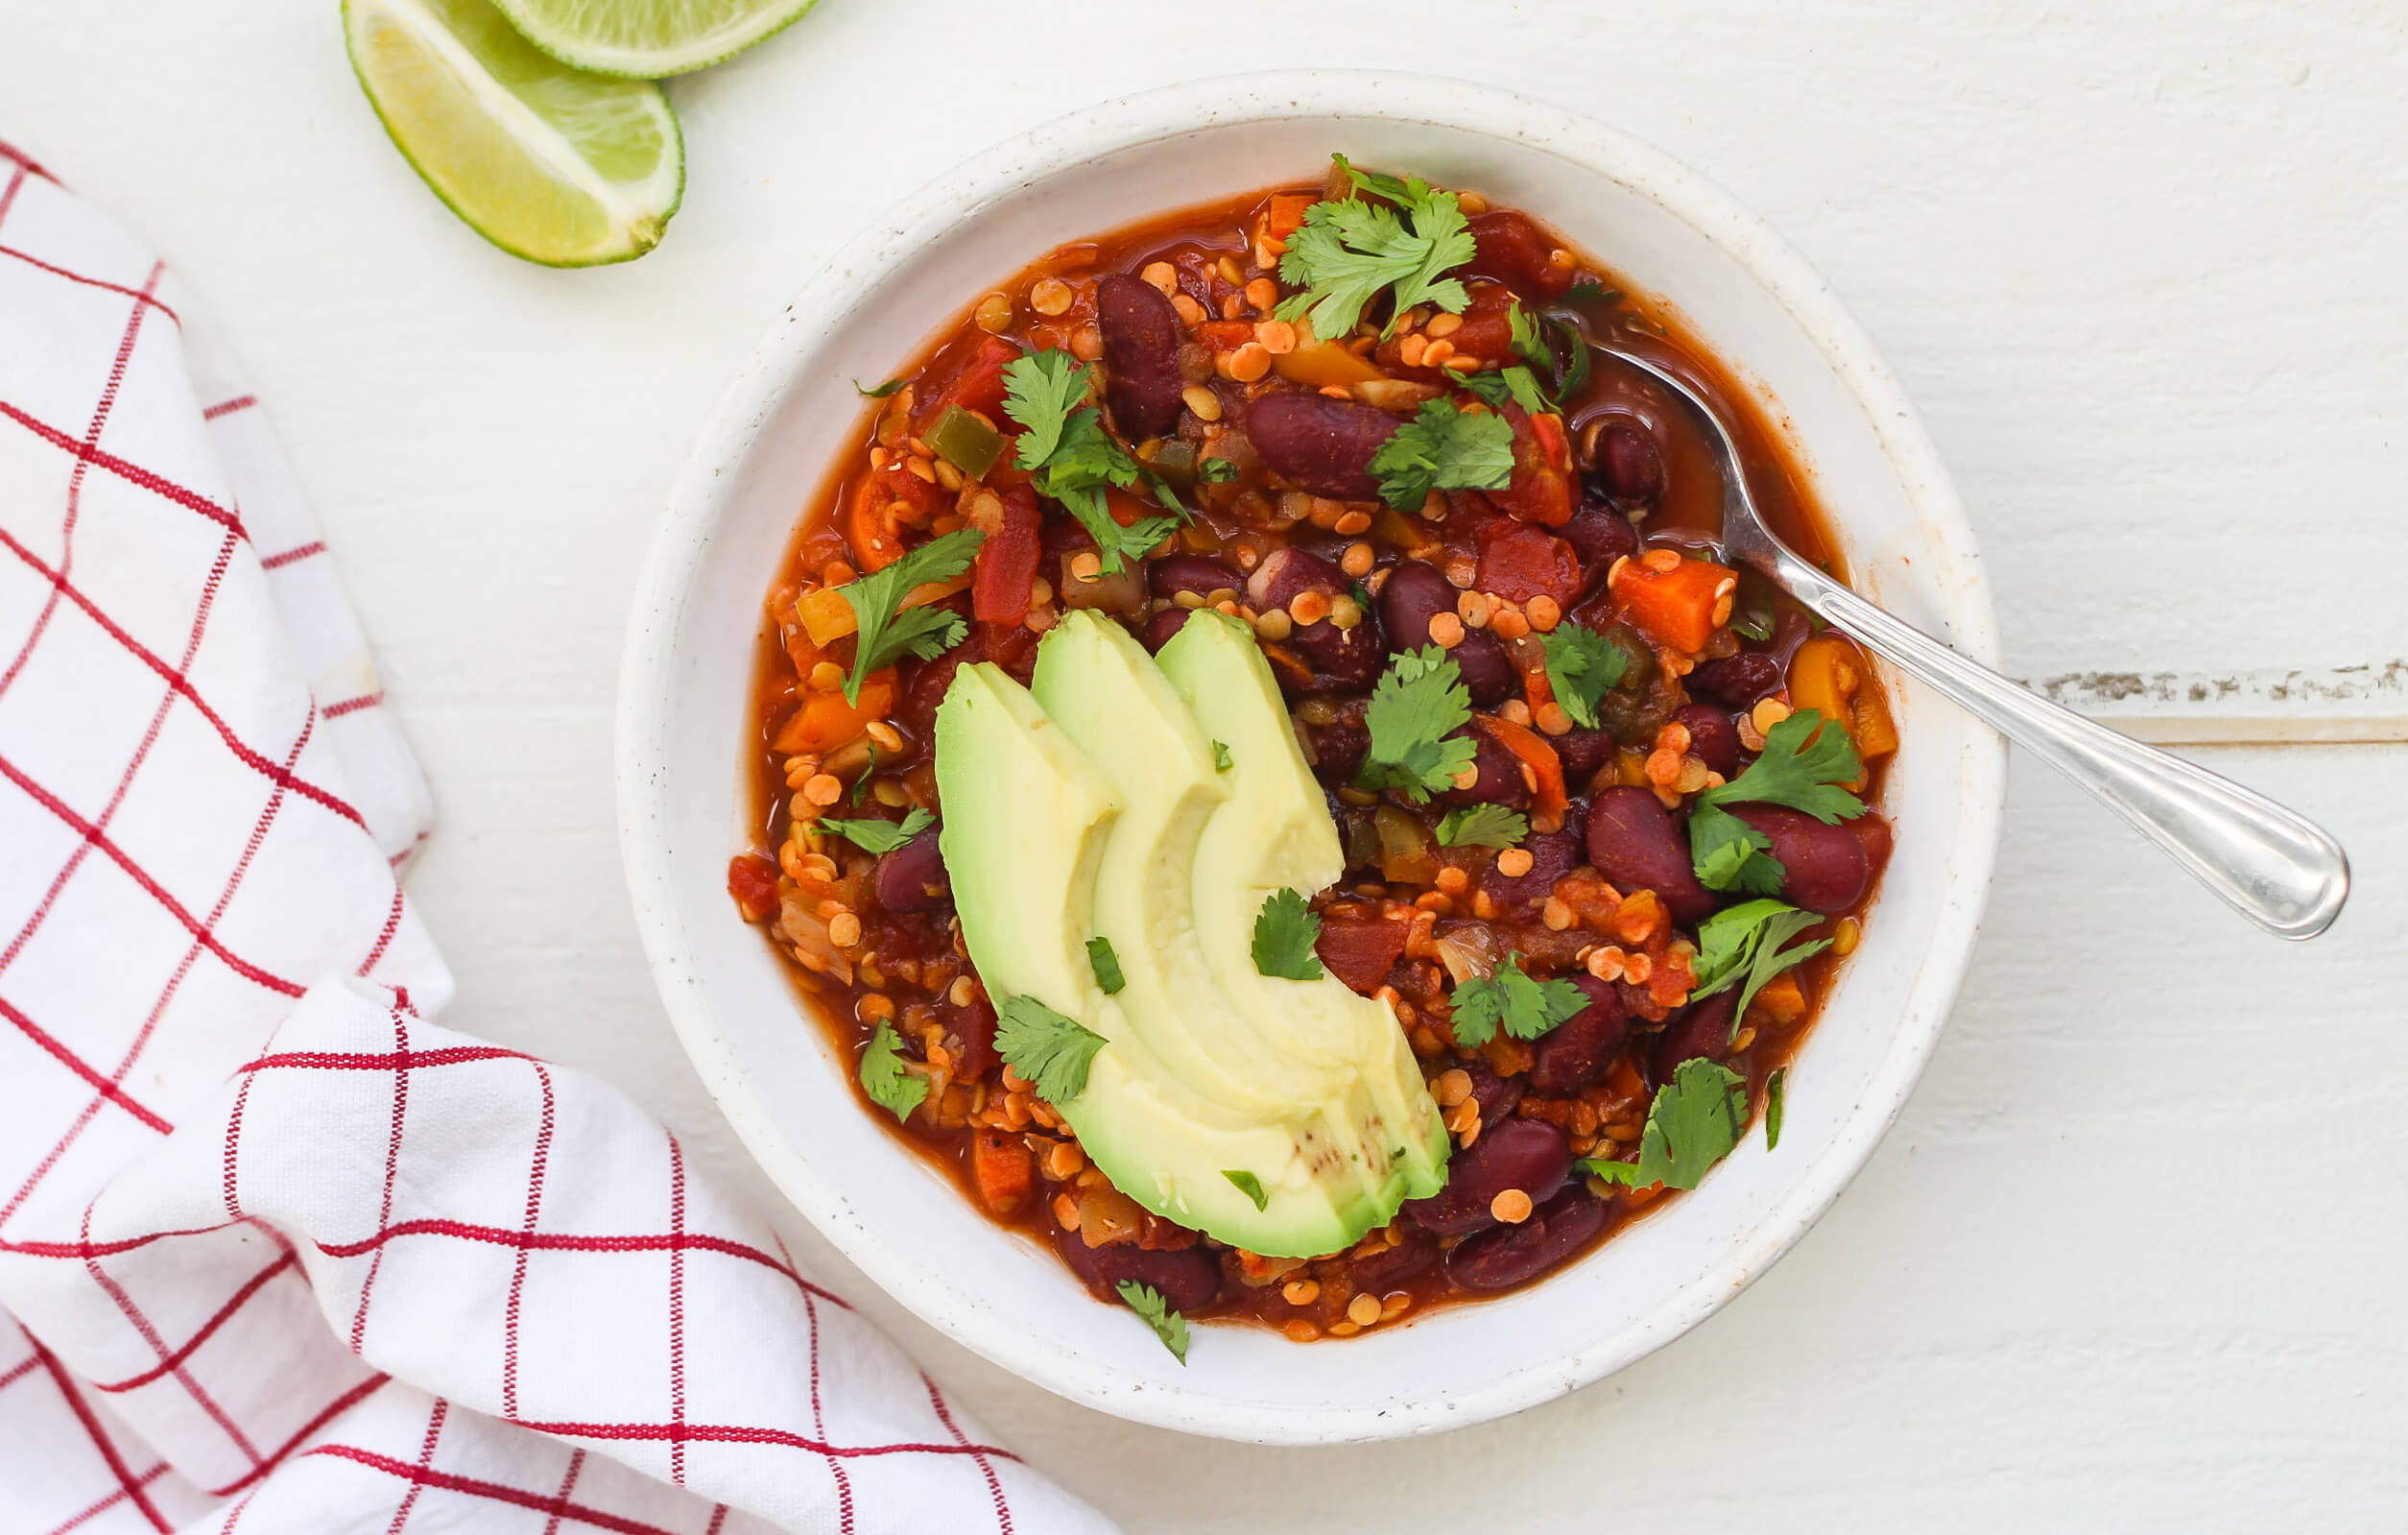 Nutrition Planning for Runners and Triathletes: Slow Cooker Lentil Chili